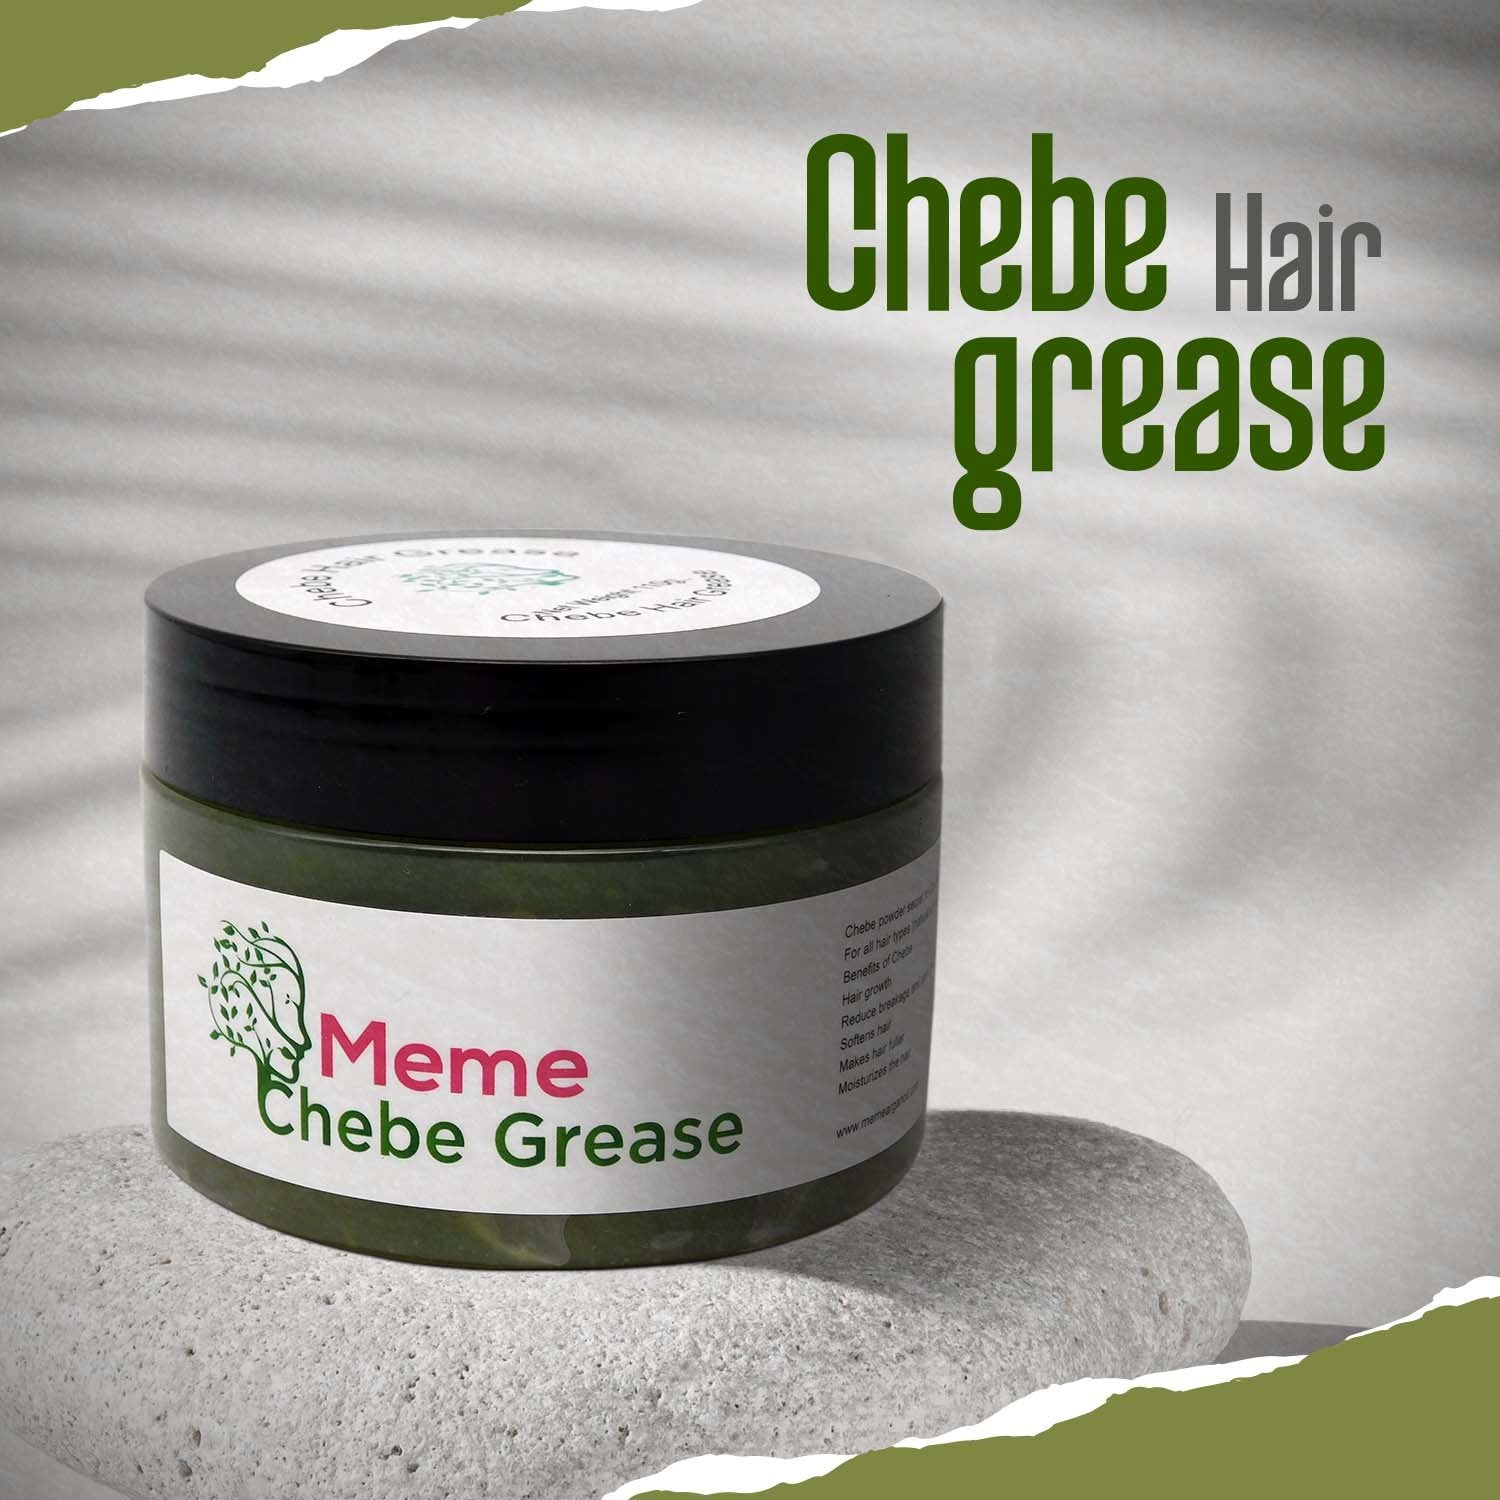 MEME Chebe Hair Grease for Hair Growth - 4 fl oz, Hair Pomade Hydrating Hair Mask for Curly Hair with Chebe Powder and Karkar Oil - Perfect for Hair Shine, Moisturizes Hair and Promote Hair Growth